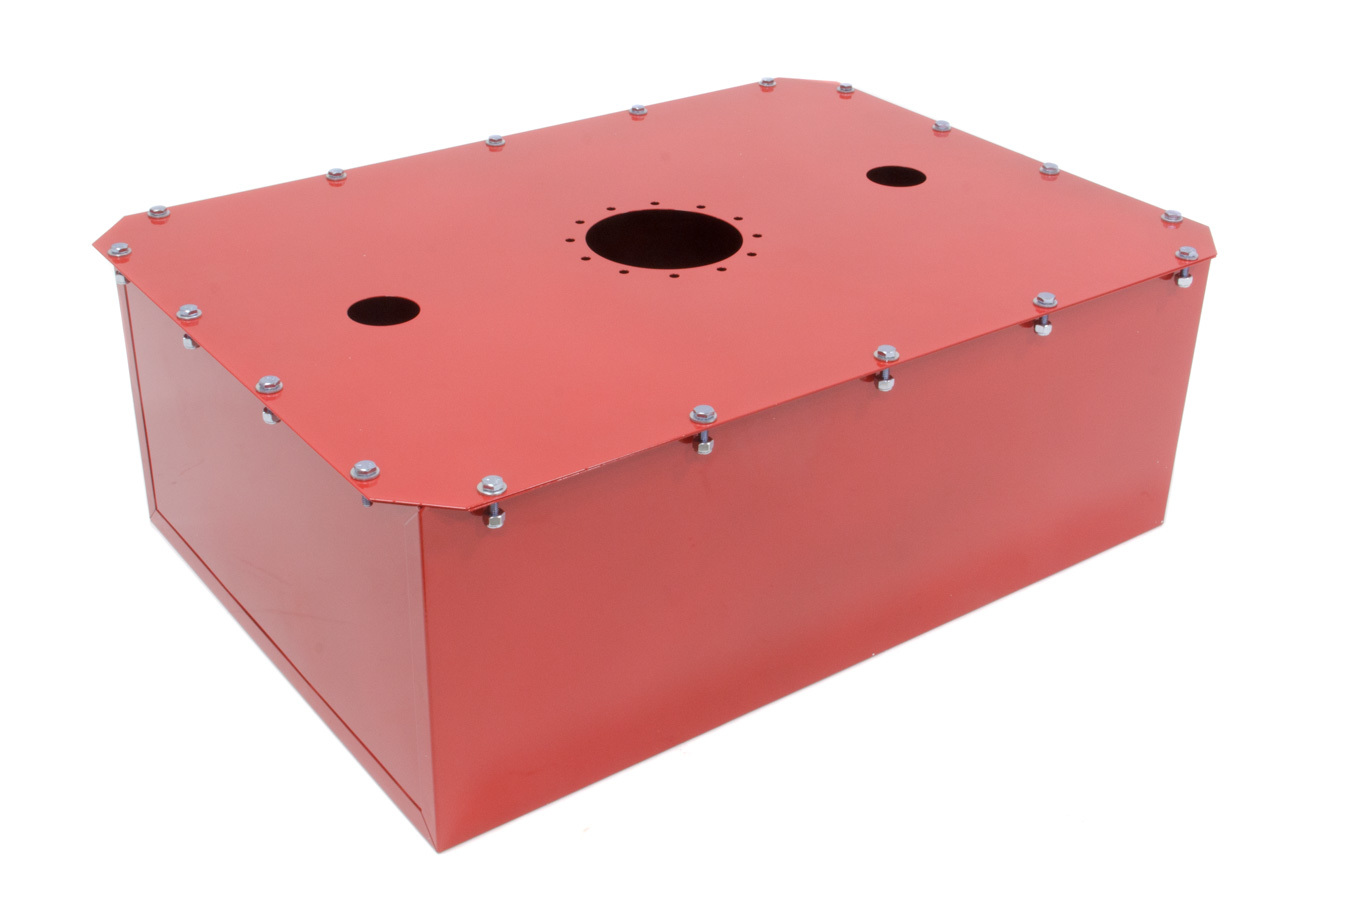 JAZ Products 897-016-06 Fuel Cell Can, 16 gal, 26 x 18 x 10 in Tall, Steel, Red Powder Coat, Kit